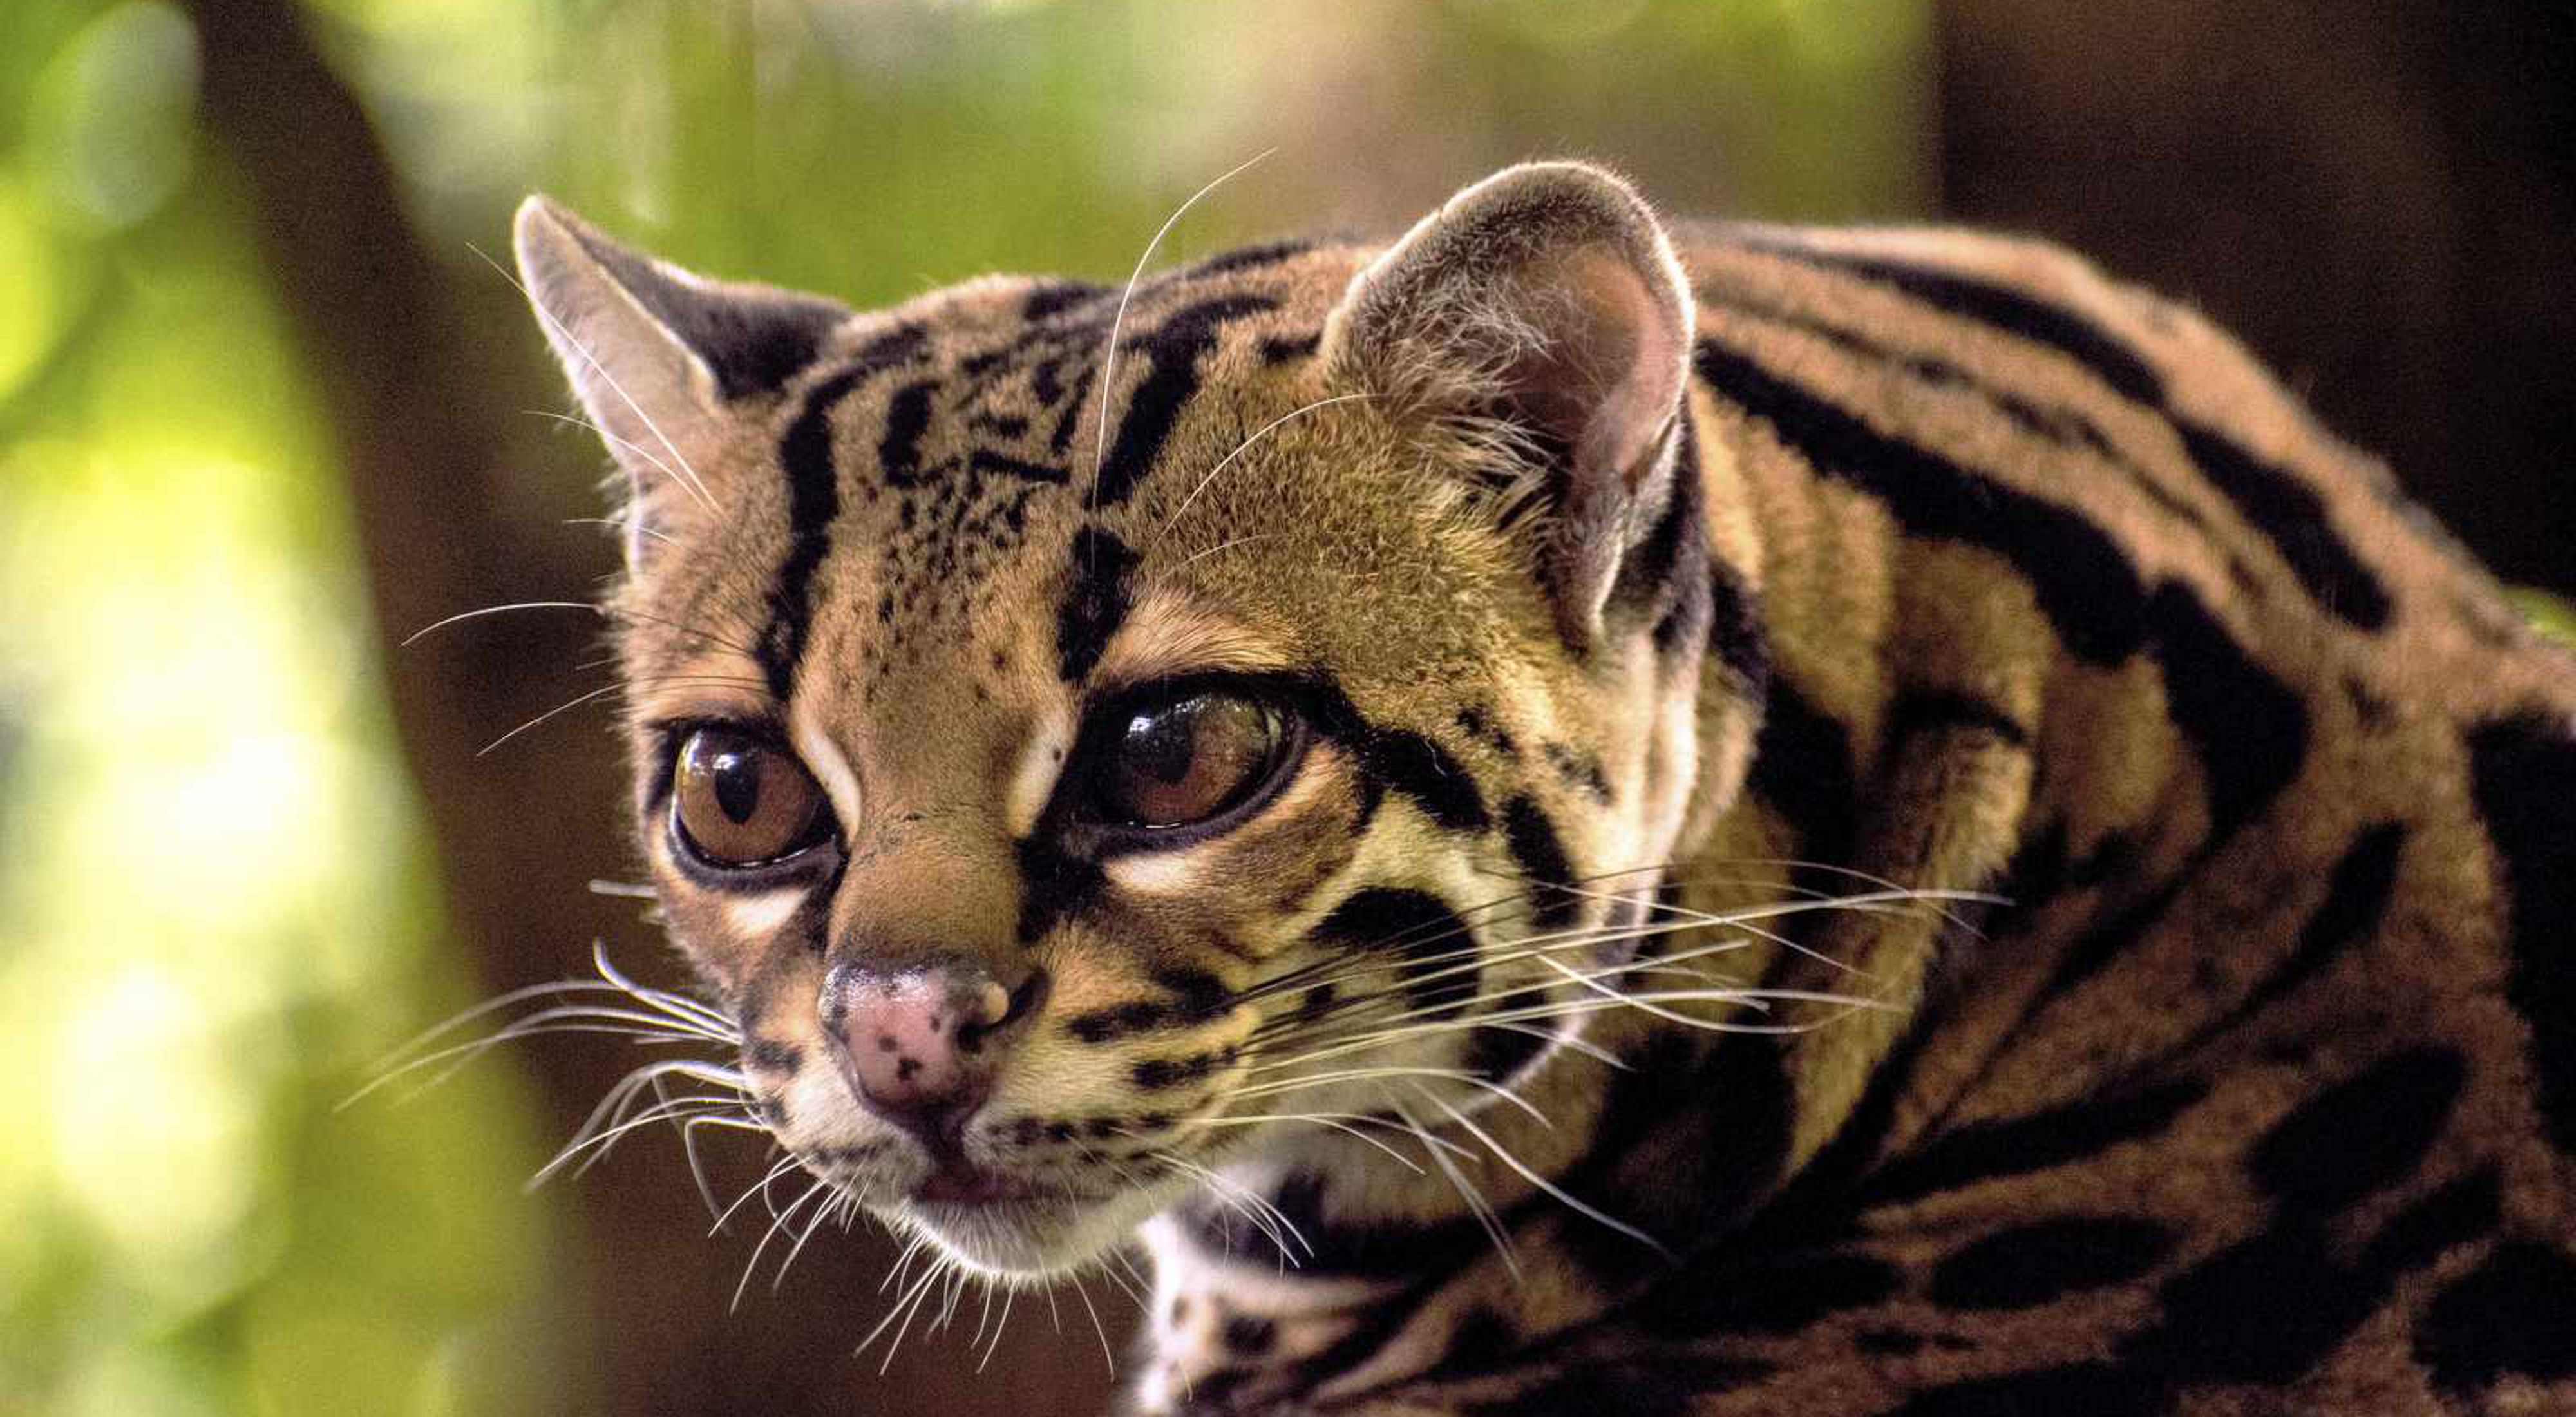 Are ocelots endangered in the US?